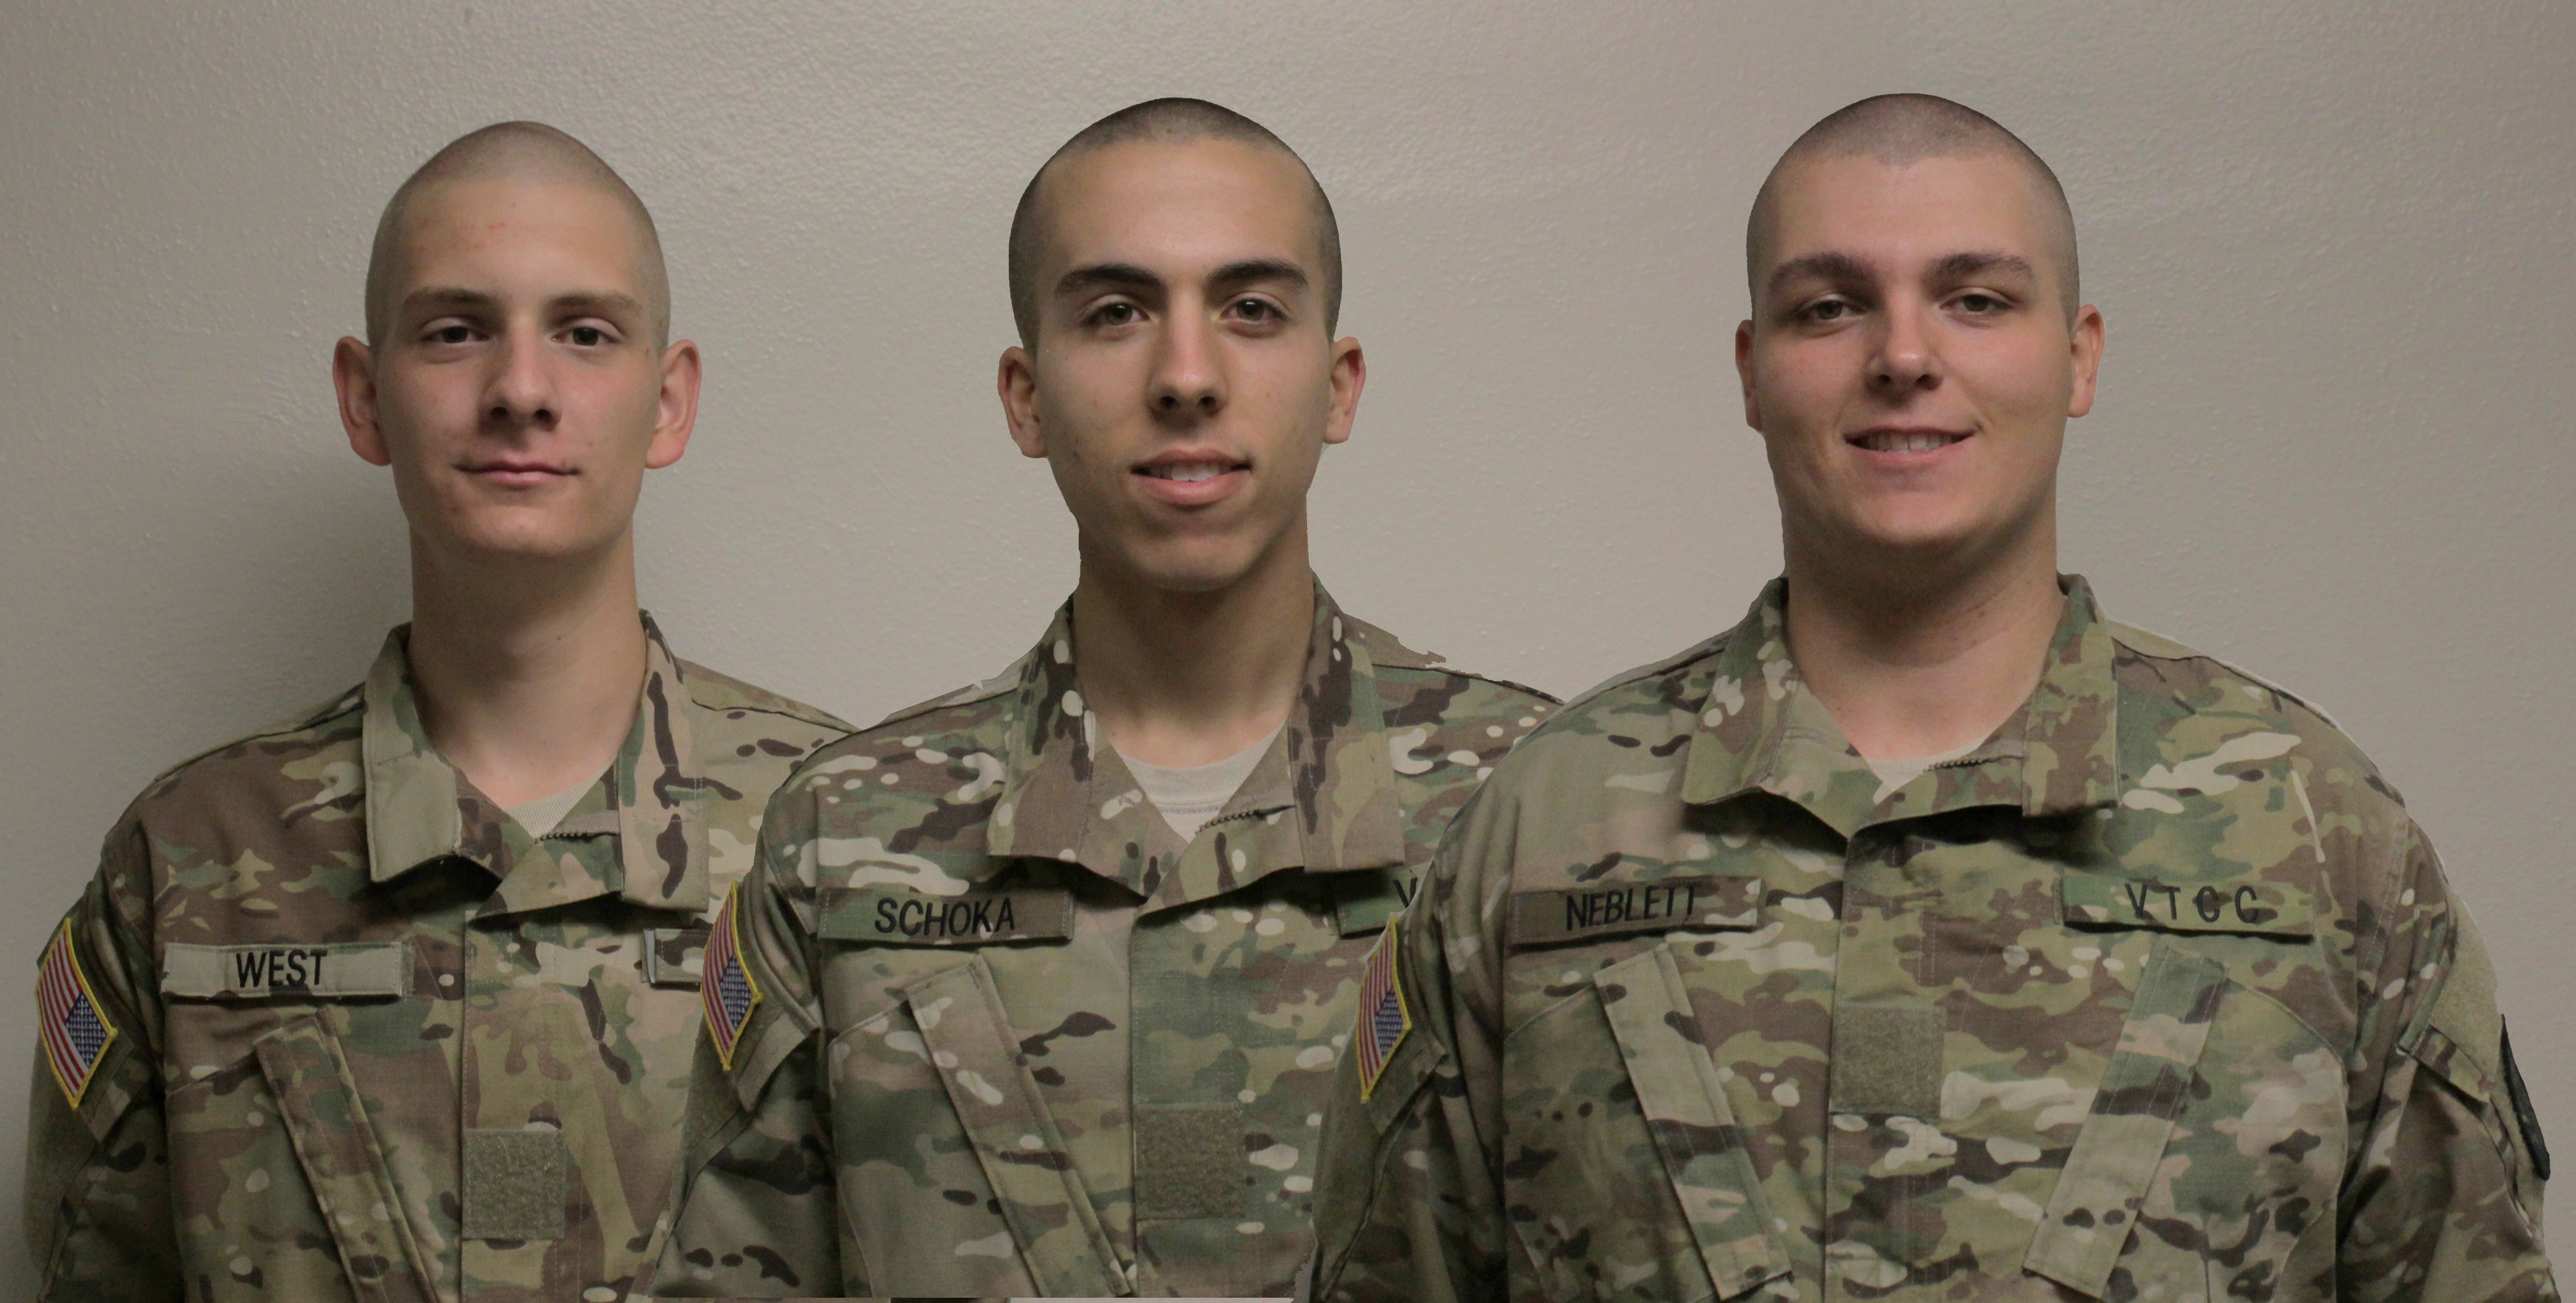 From left to right are Cadets Jonah West, Michael Schoka, and Alexander Neblett in their utility uniforms.